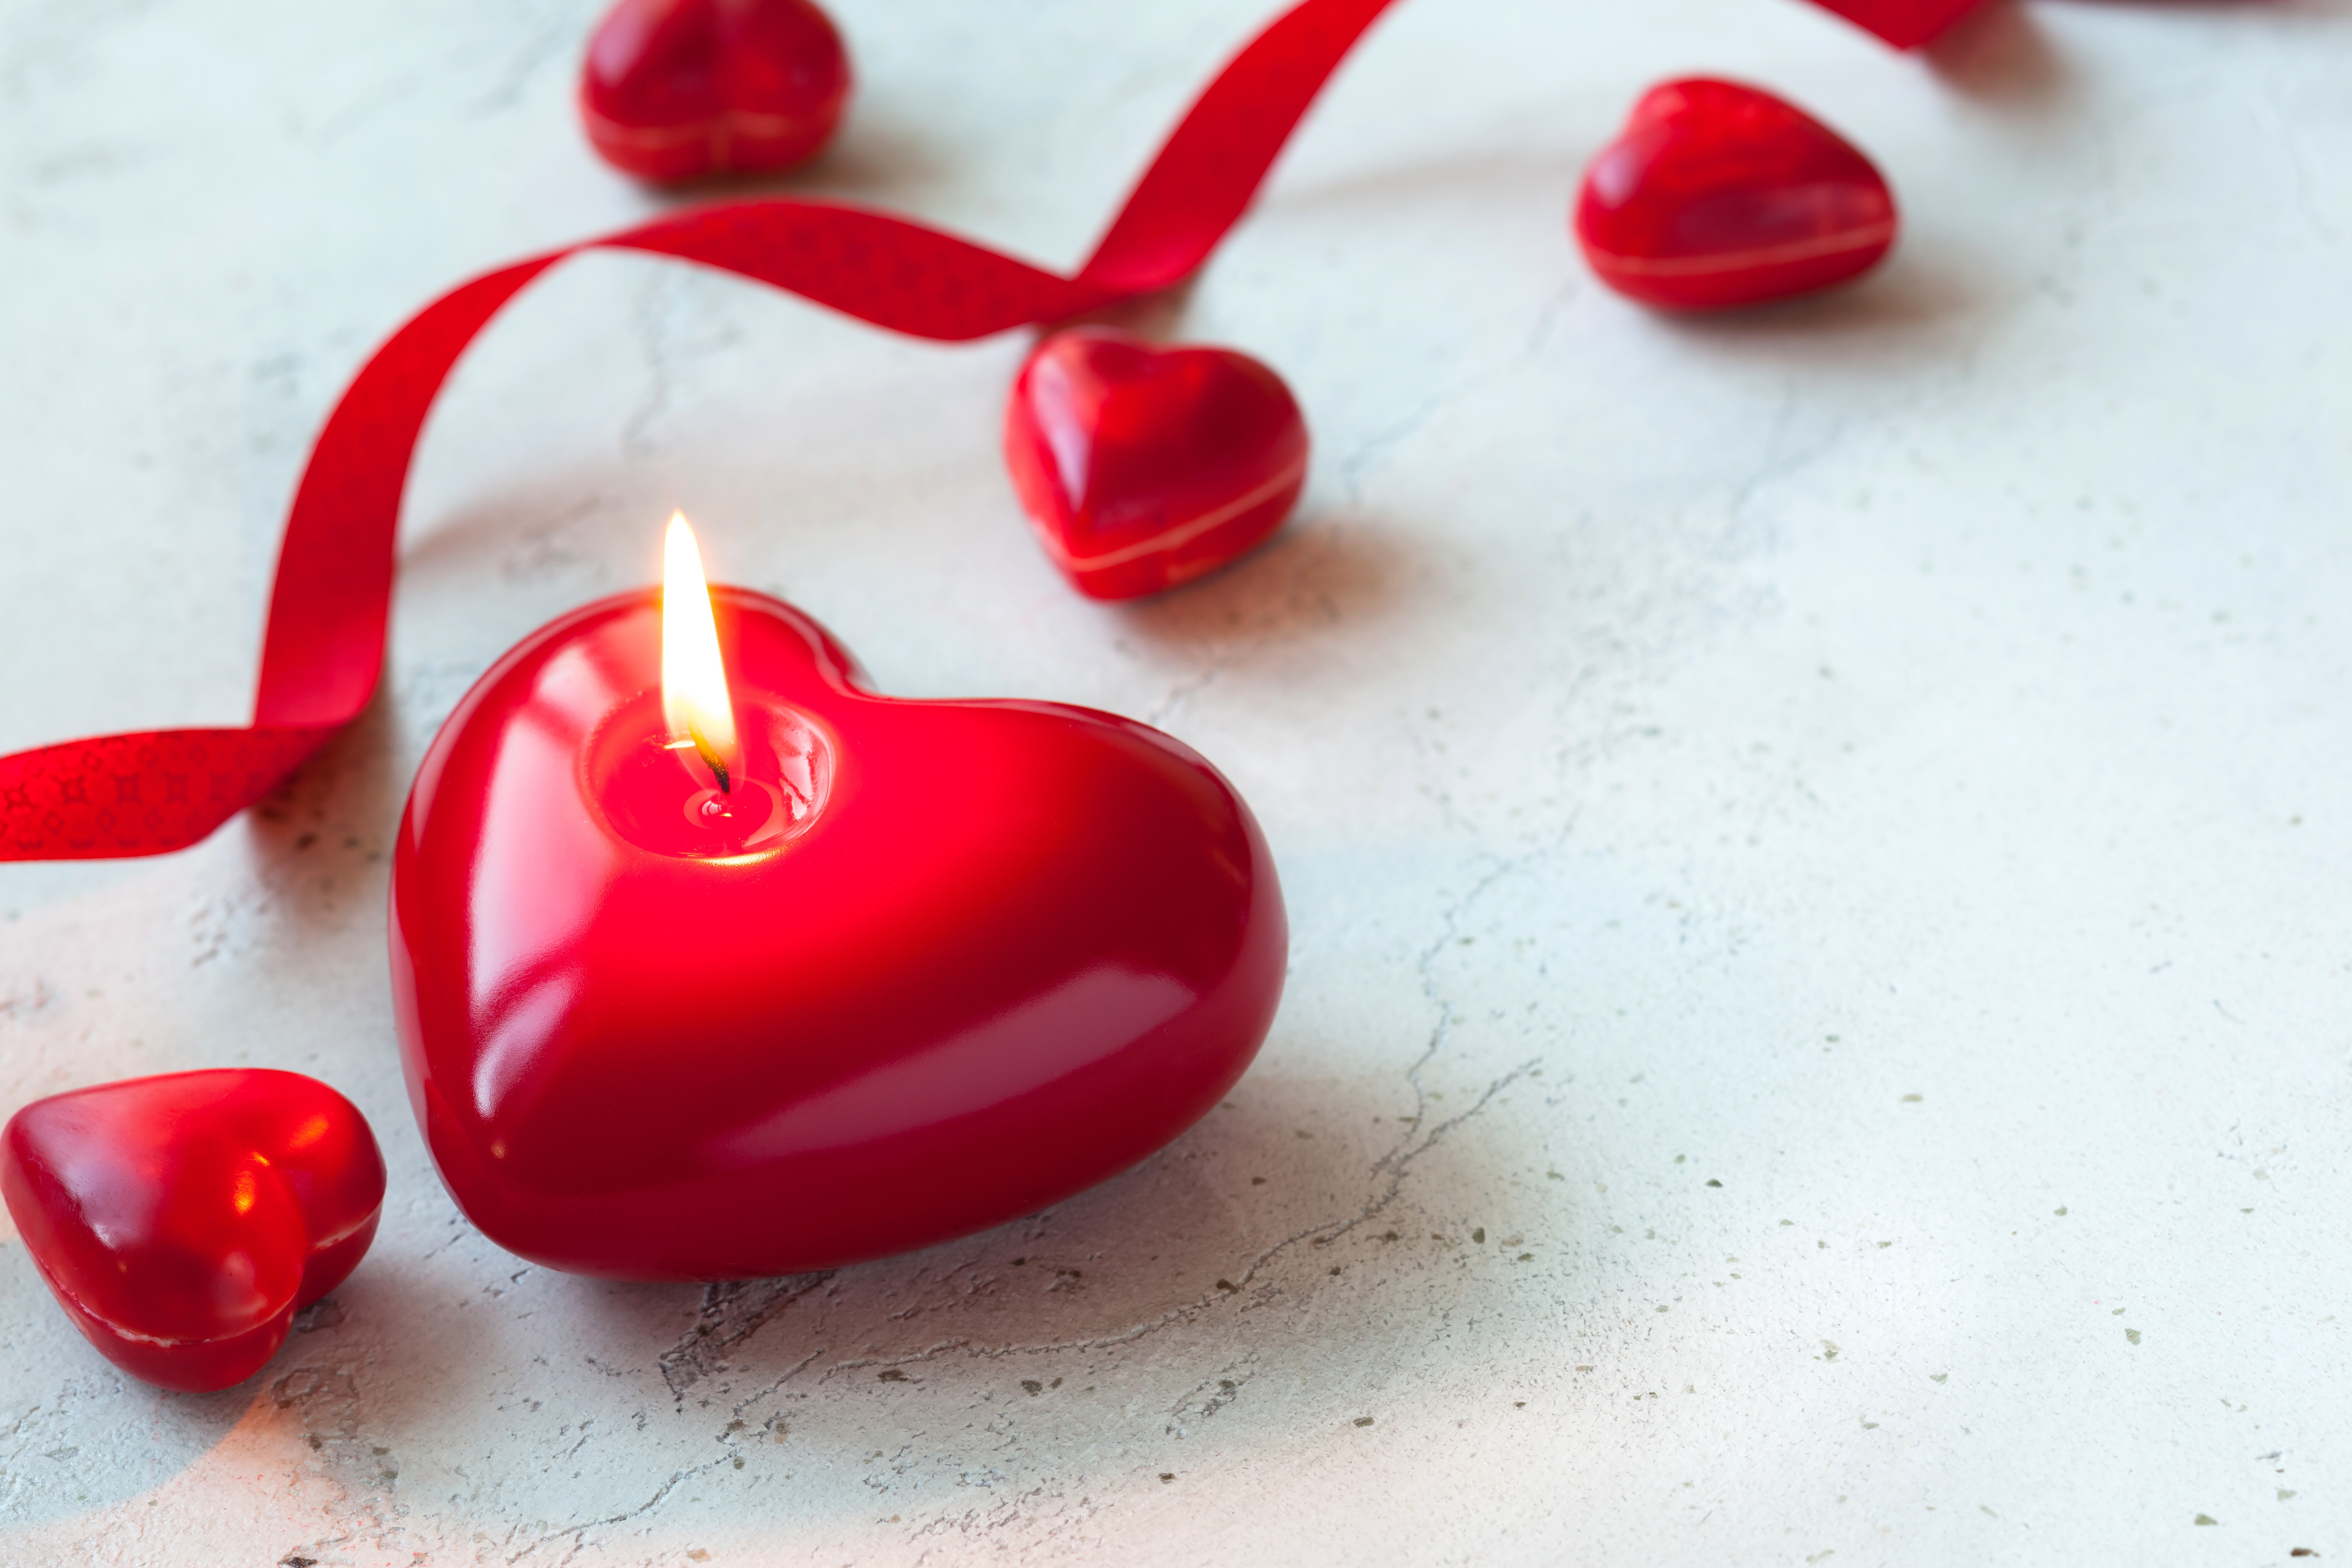 Candle Heart Shaped Love Romantic 5616x3744